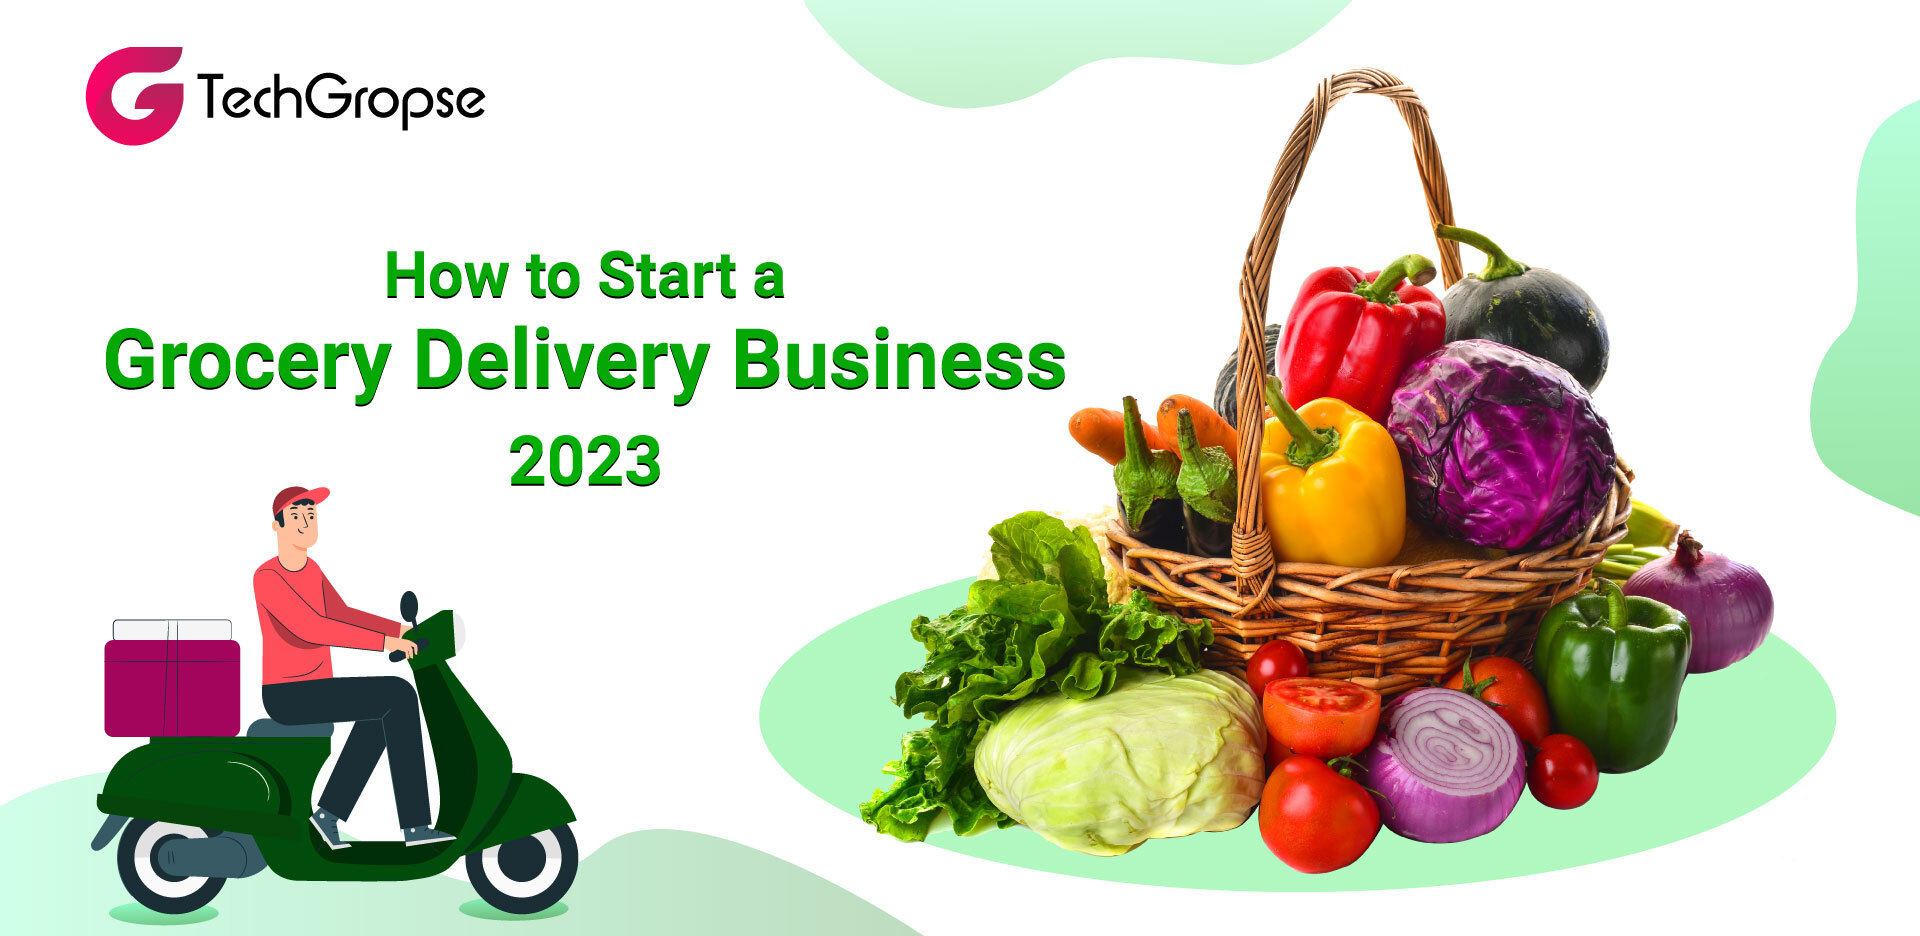 How to Start a Grocery Delivery Business in 2023?